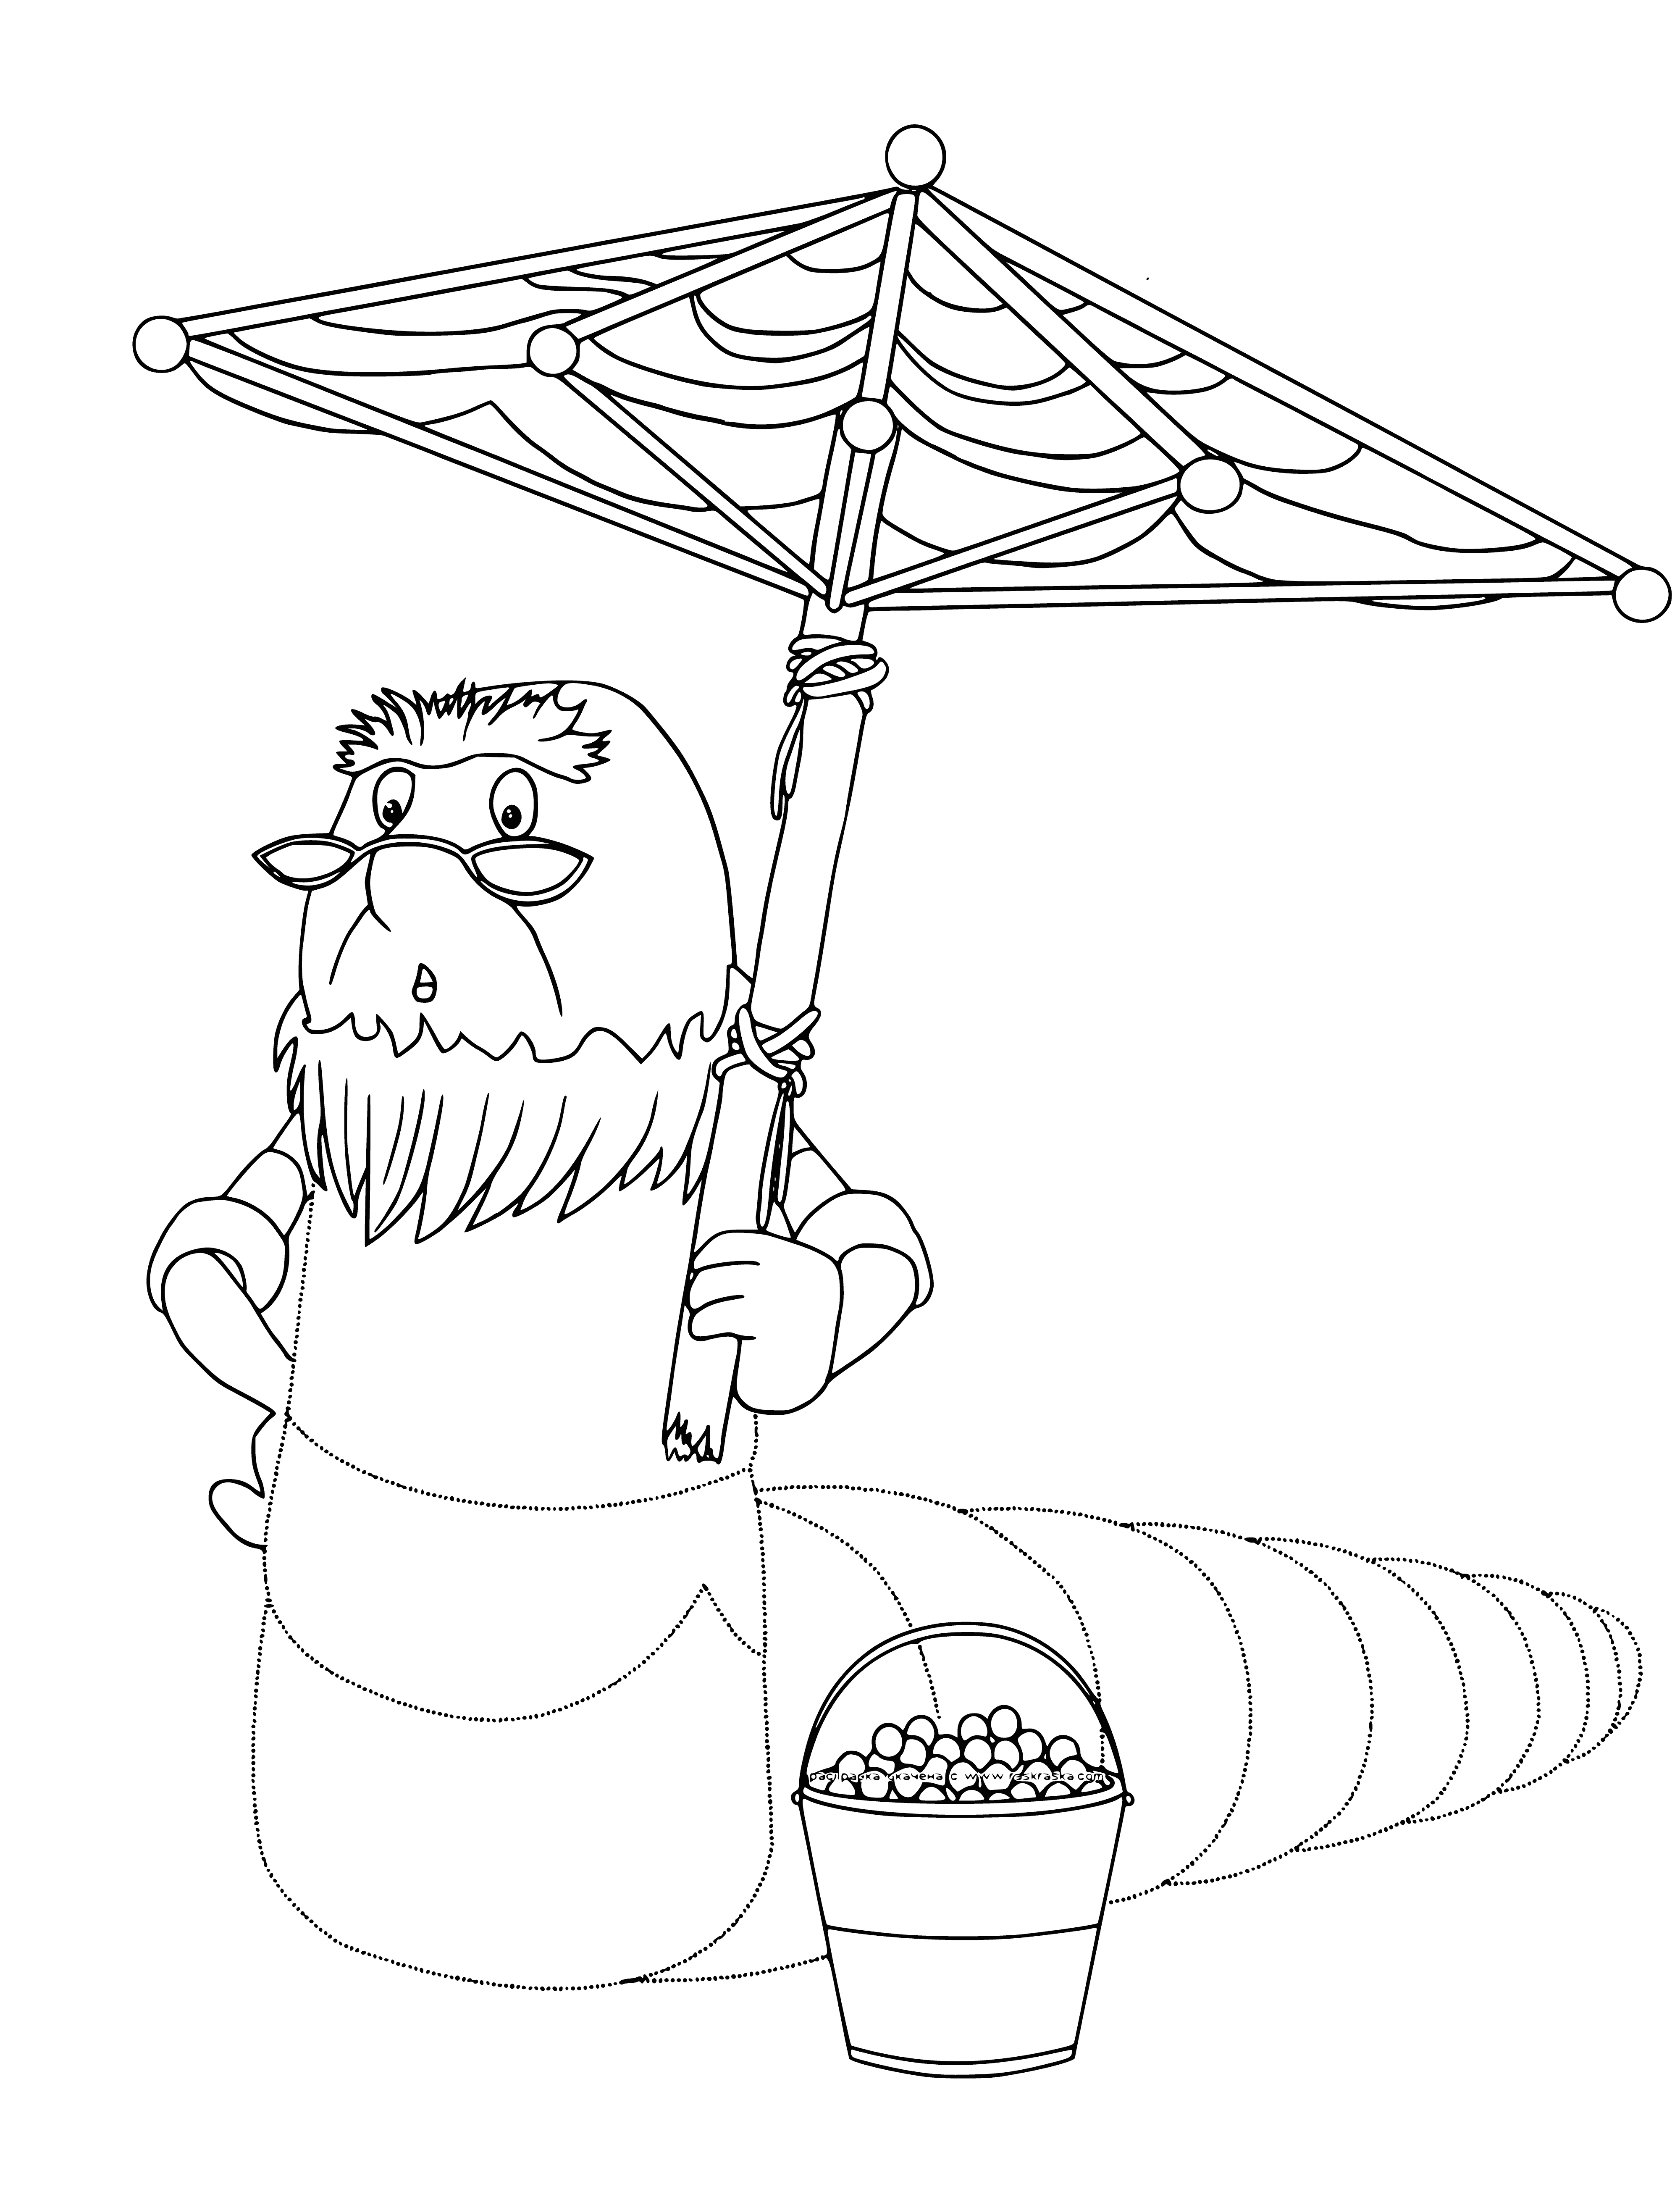 coloring page: Two creatures - blue, yellow & orange - standing on two legs with two small arms each, wearing different clothes.